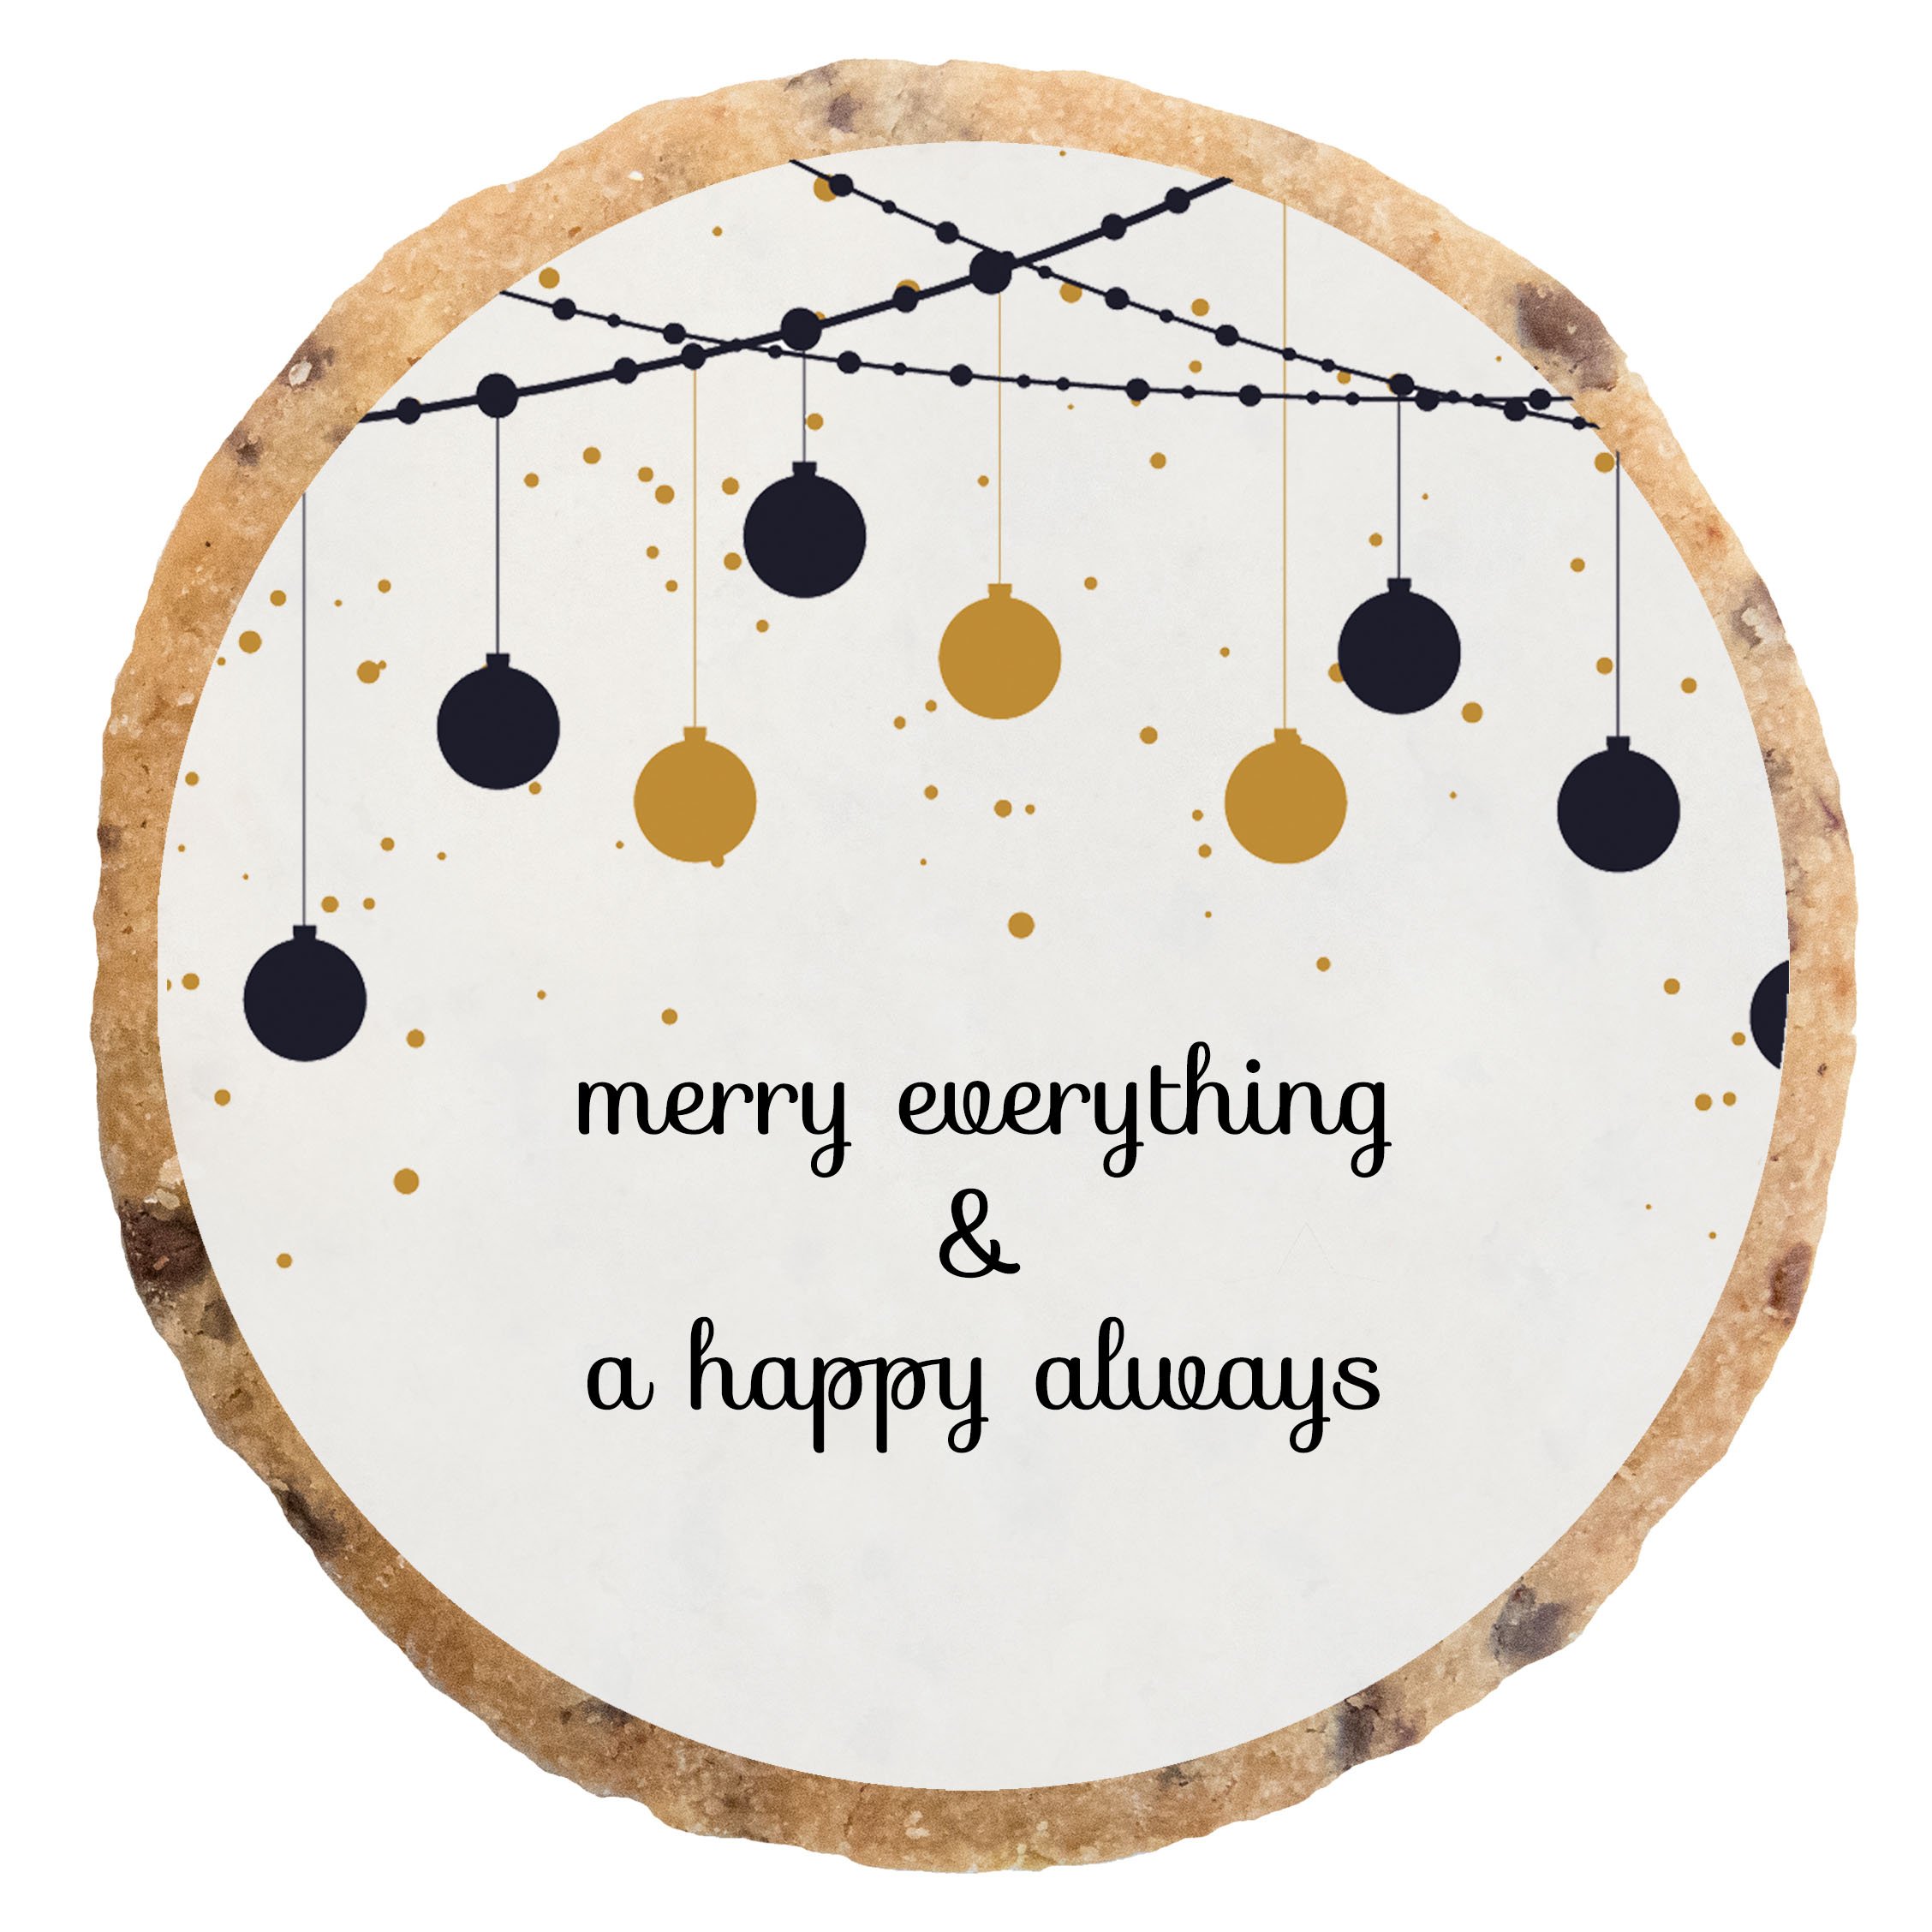 "merry everything and a happy always" MotivKEKS